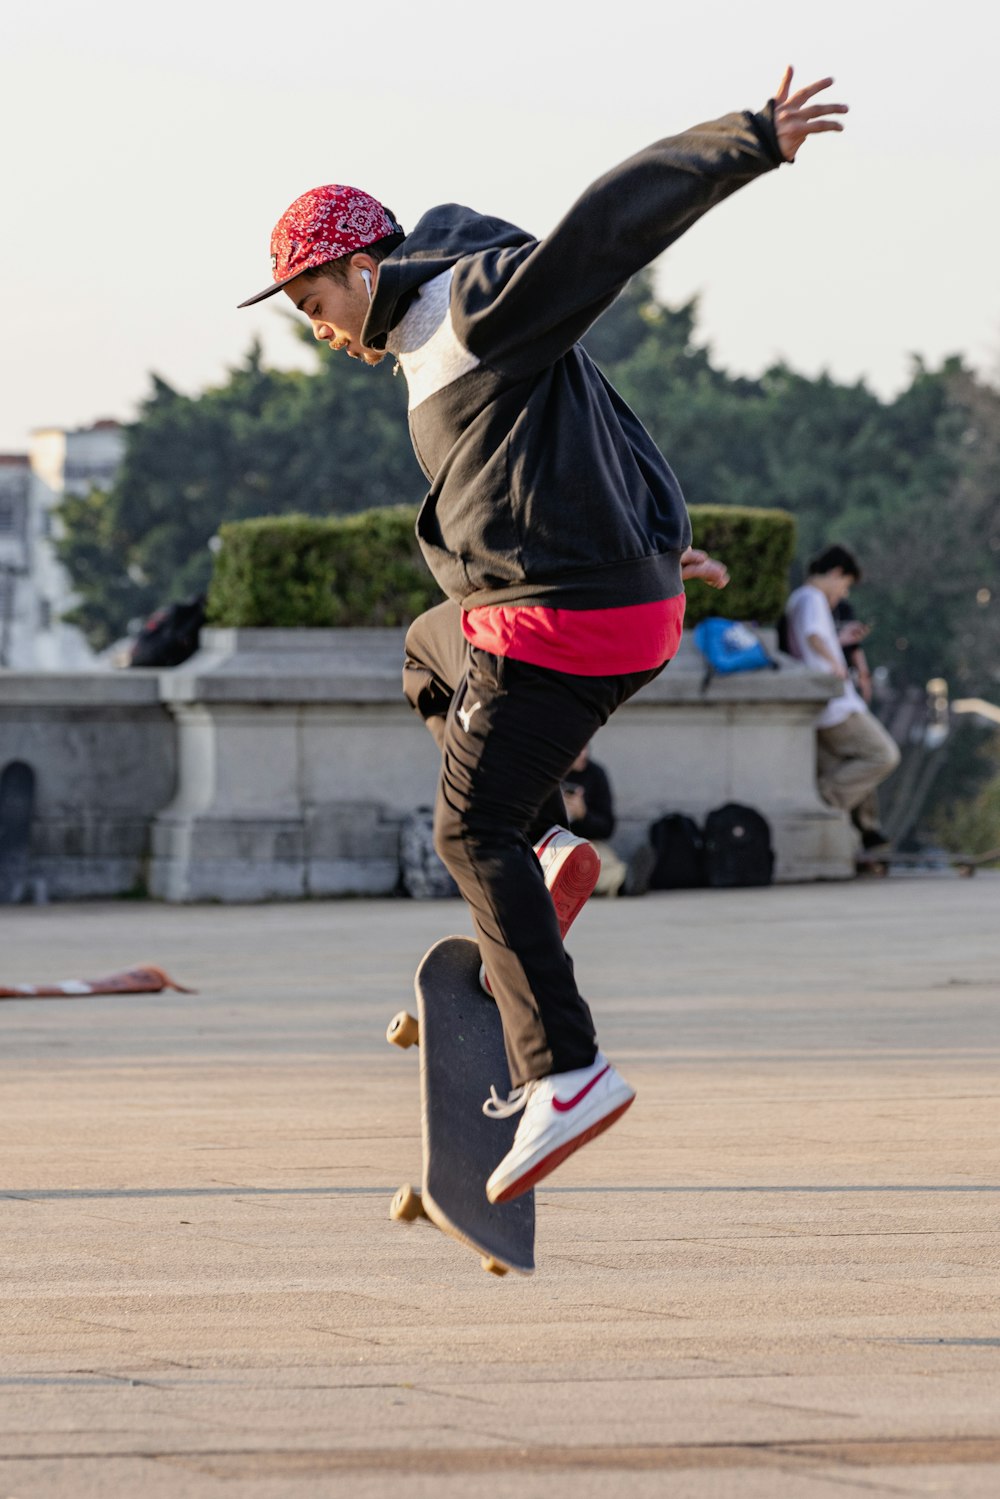 a skateboarder is doing a trick in the air